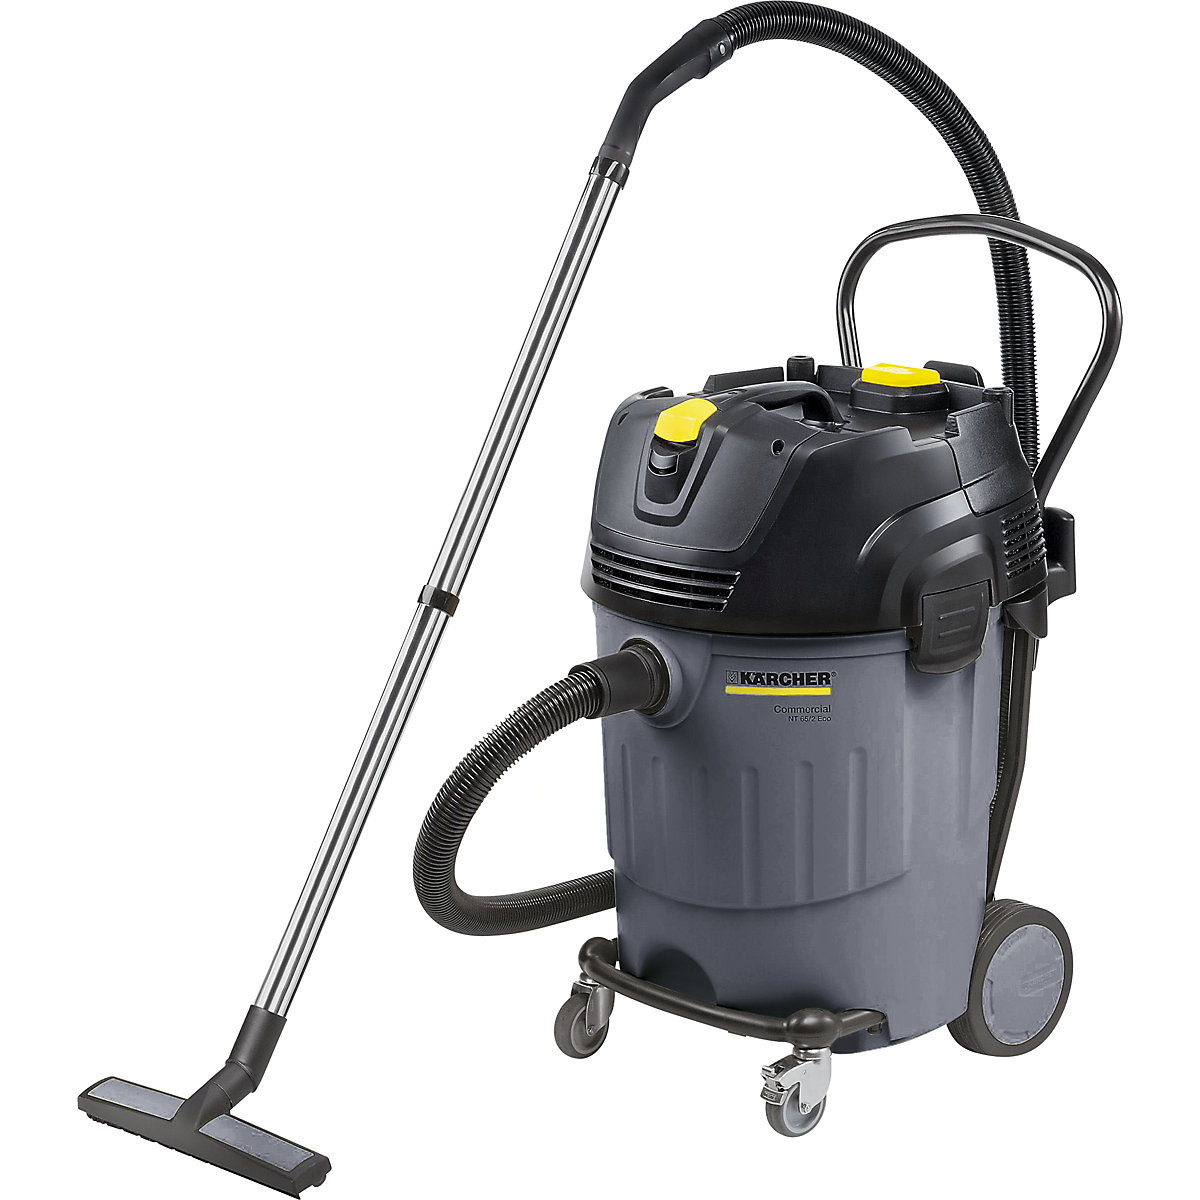 Wet and dry vacuum cleaner - Kärcher